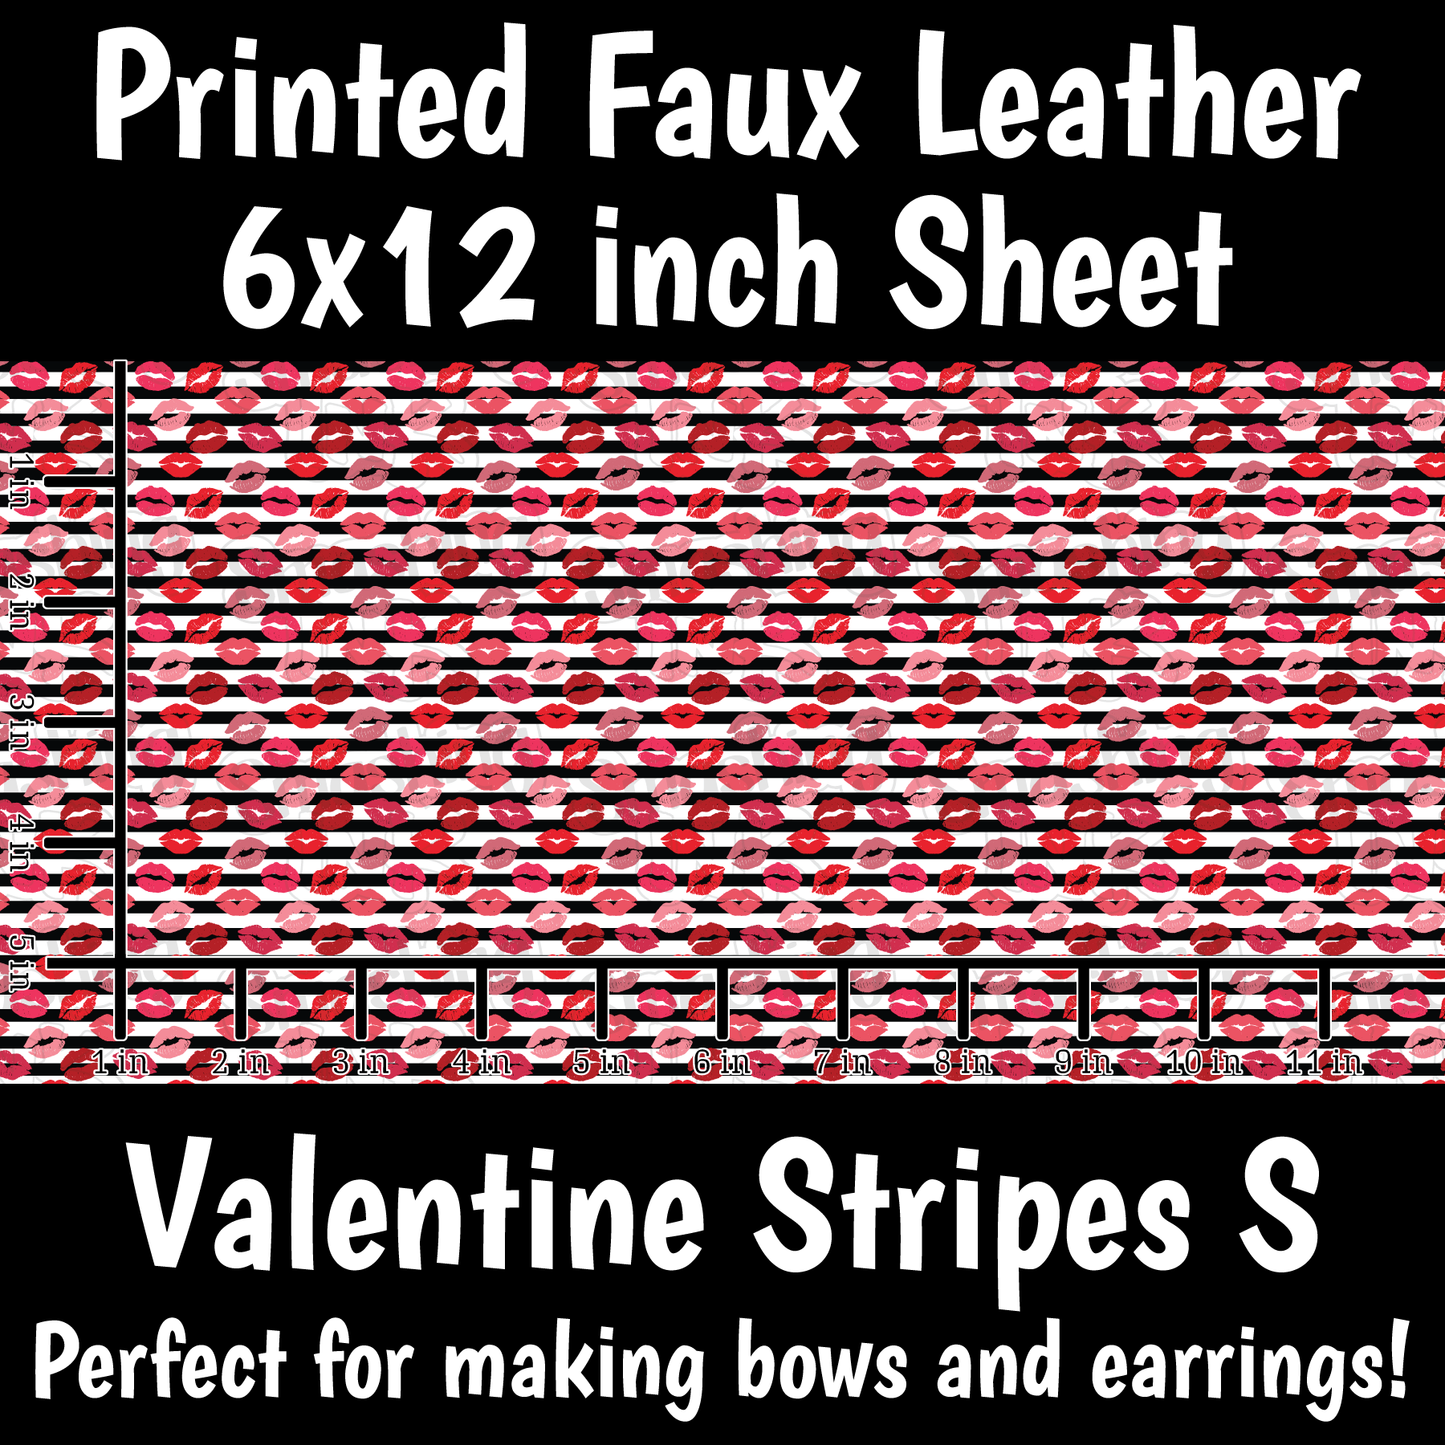 Valentine Stripes S- Faux Leather Sheet (SHIPS IN 3 BUS DAYS)